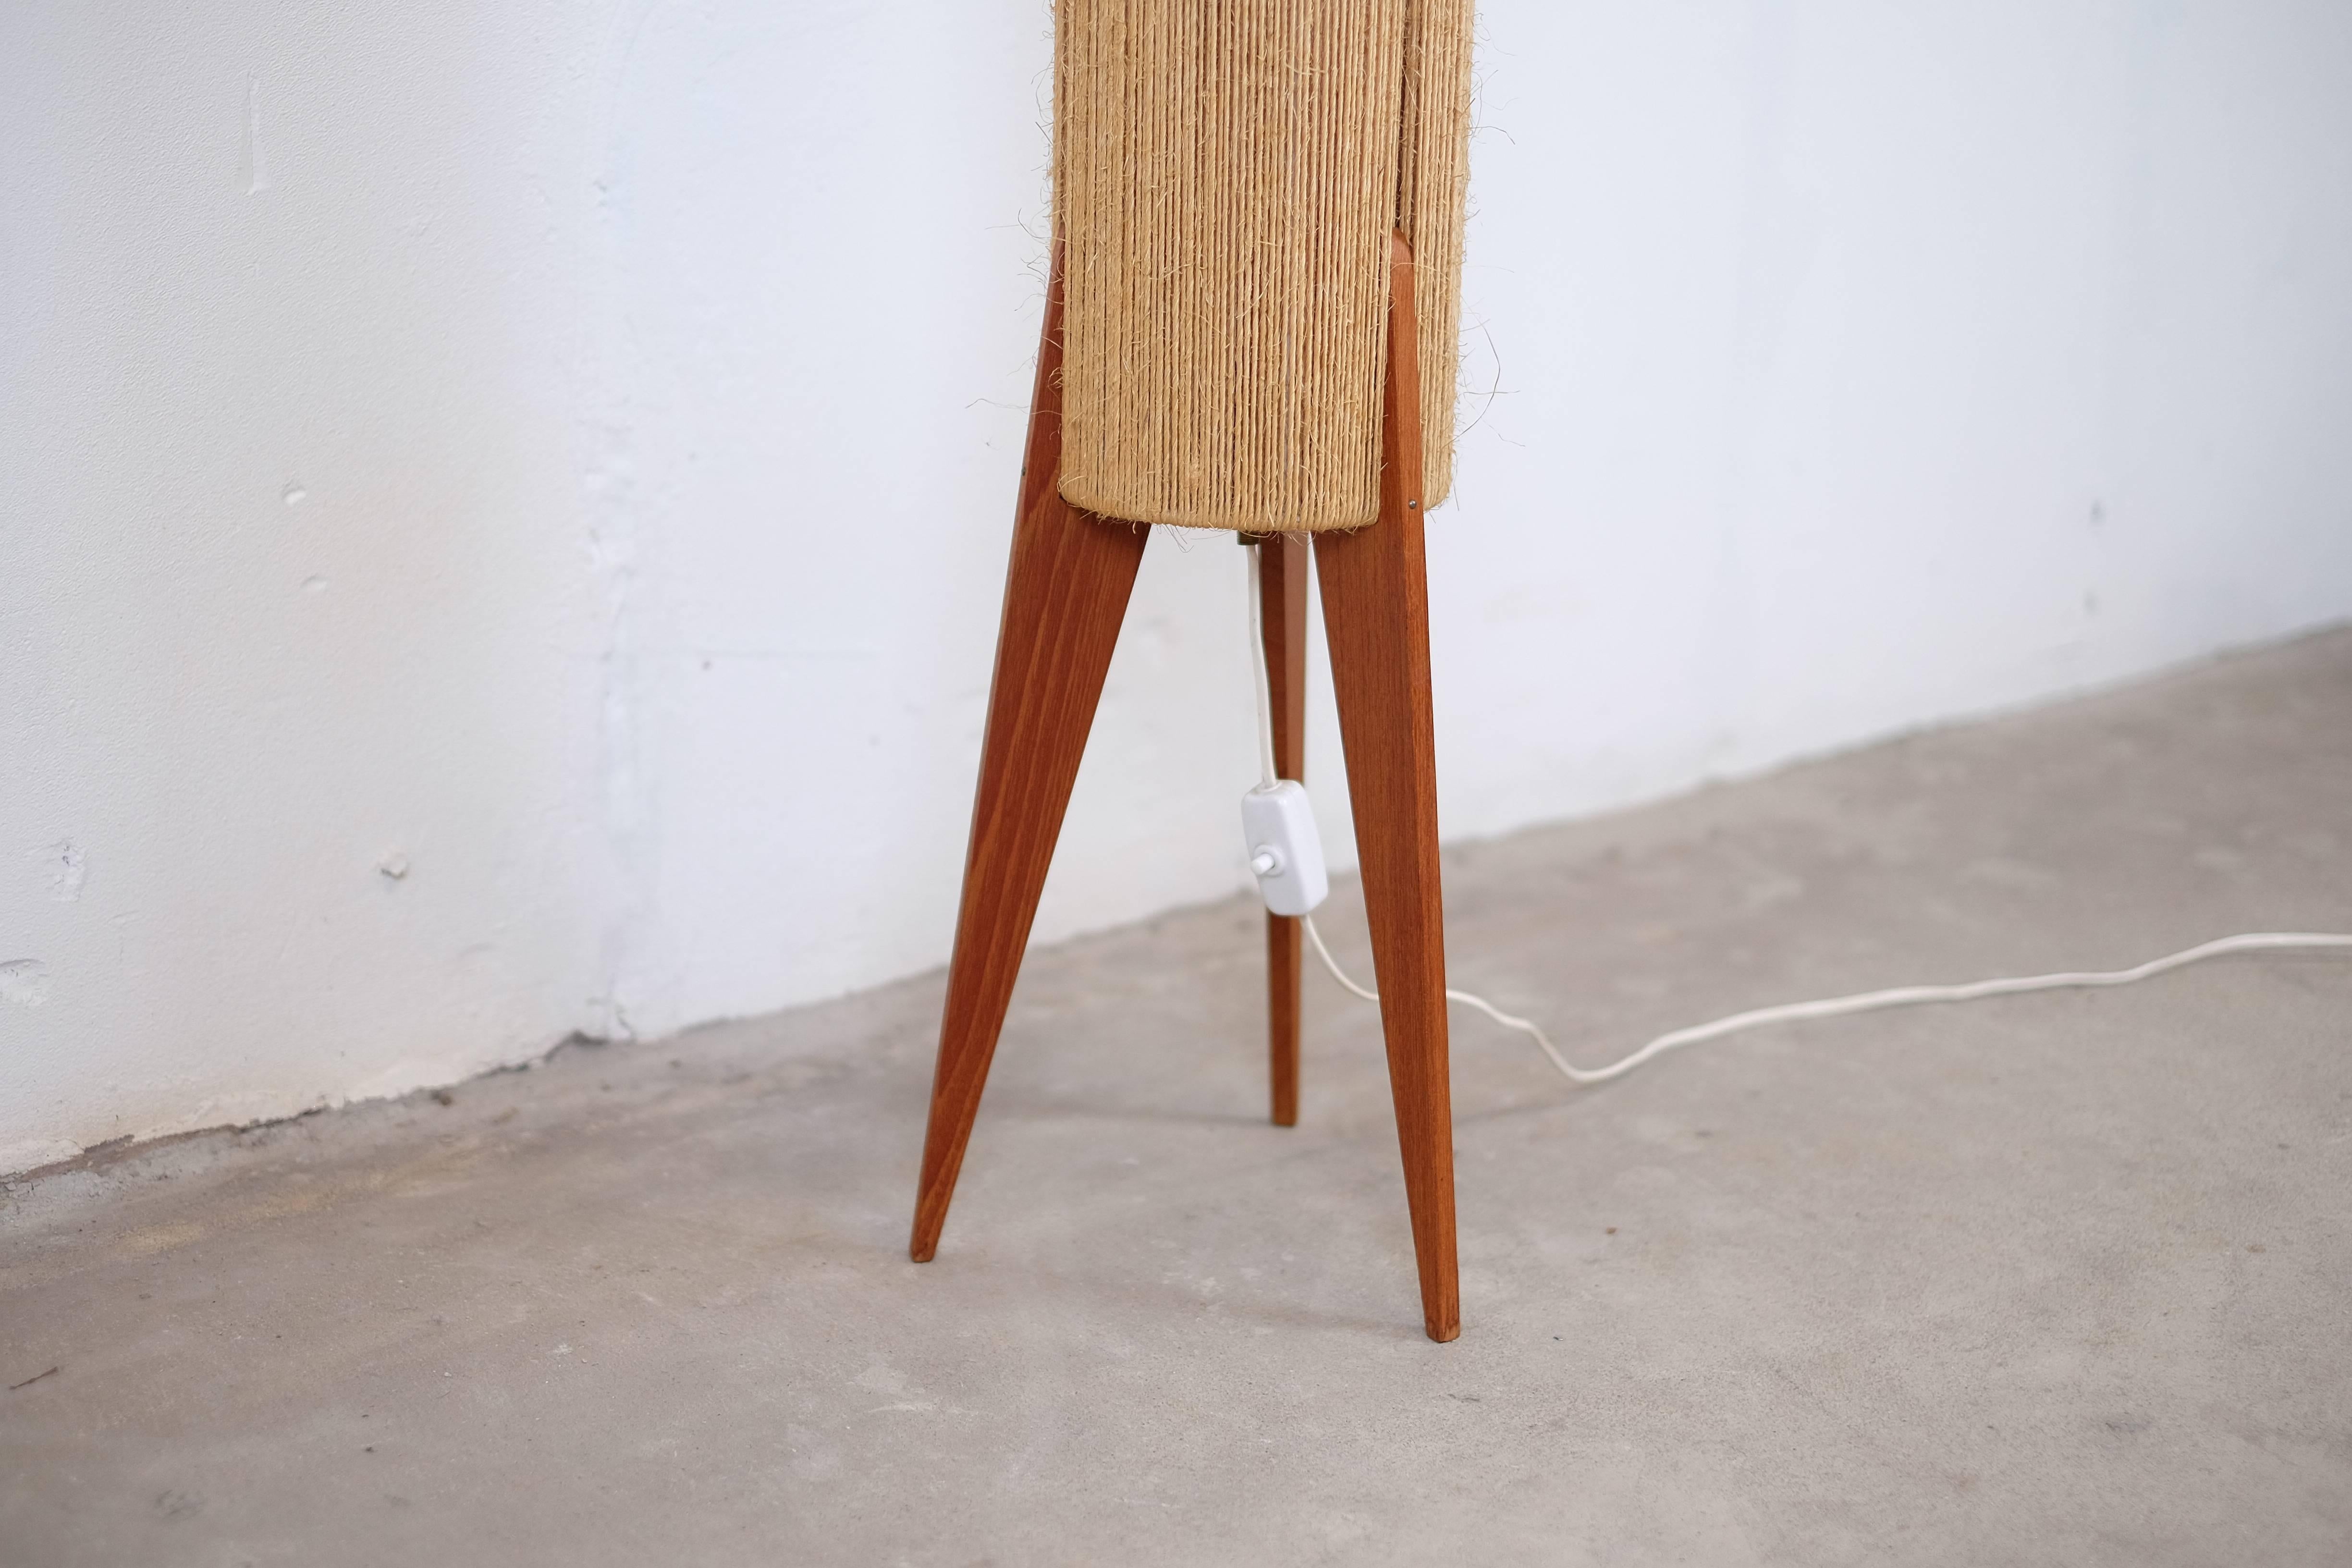 Danish floor lamp designed by Ib Fabiansen produced by Fog and Mørup with legs in solid teak and shade with jute cord.
Very beautiful lamp which look great in a corner and a rare seen lamp. 

The lamp has no broken cords and is in good vintage